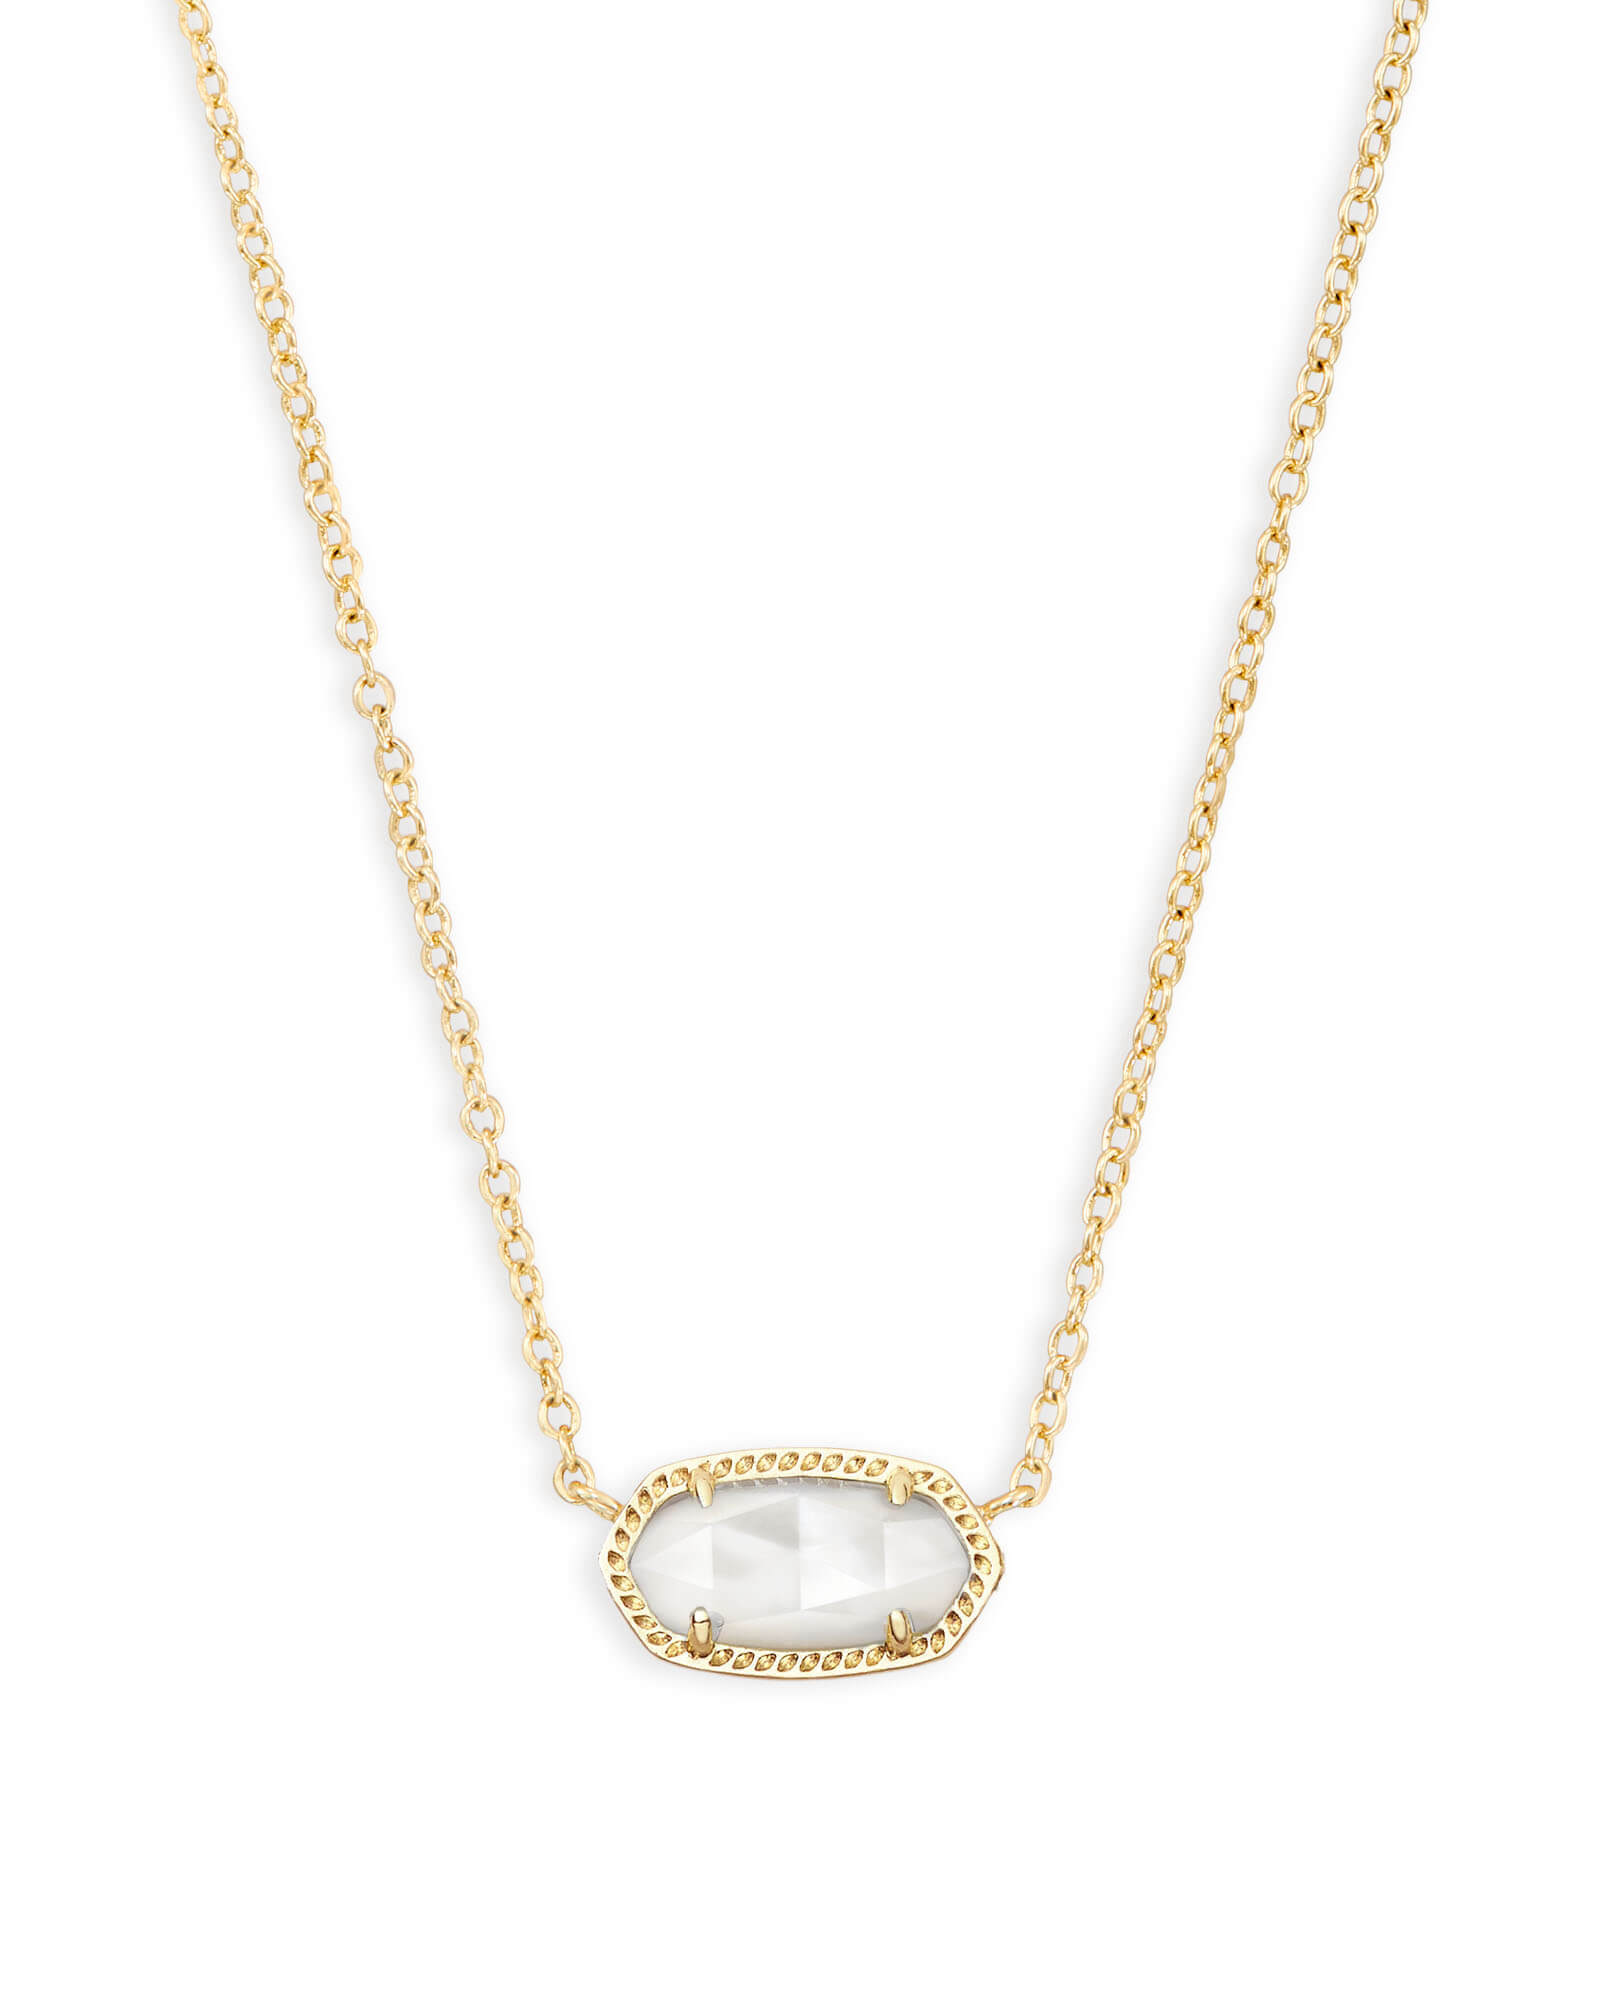 Elisa Gold Pendant Necklace in Ivory Pearl